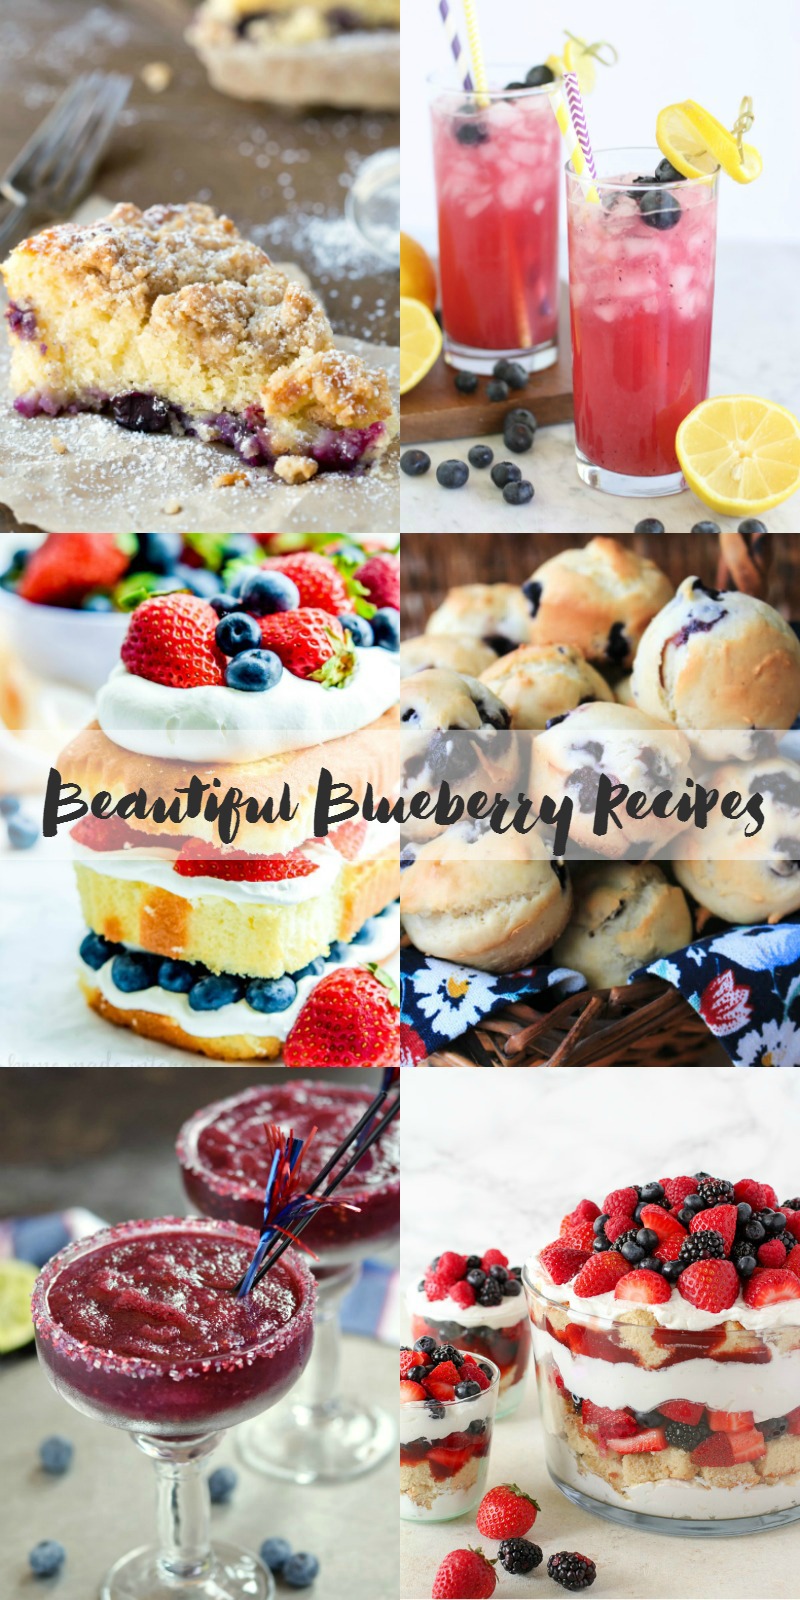 Celebrate summer with these beautiful blueberry recipes!